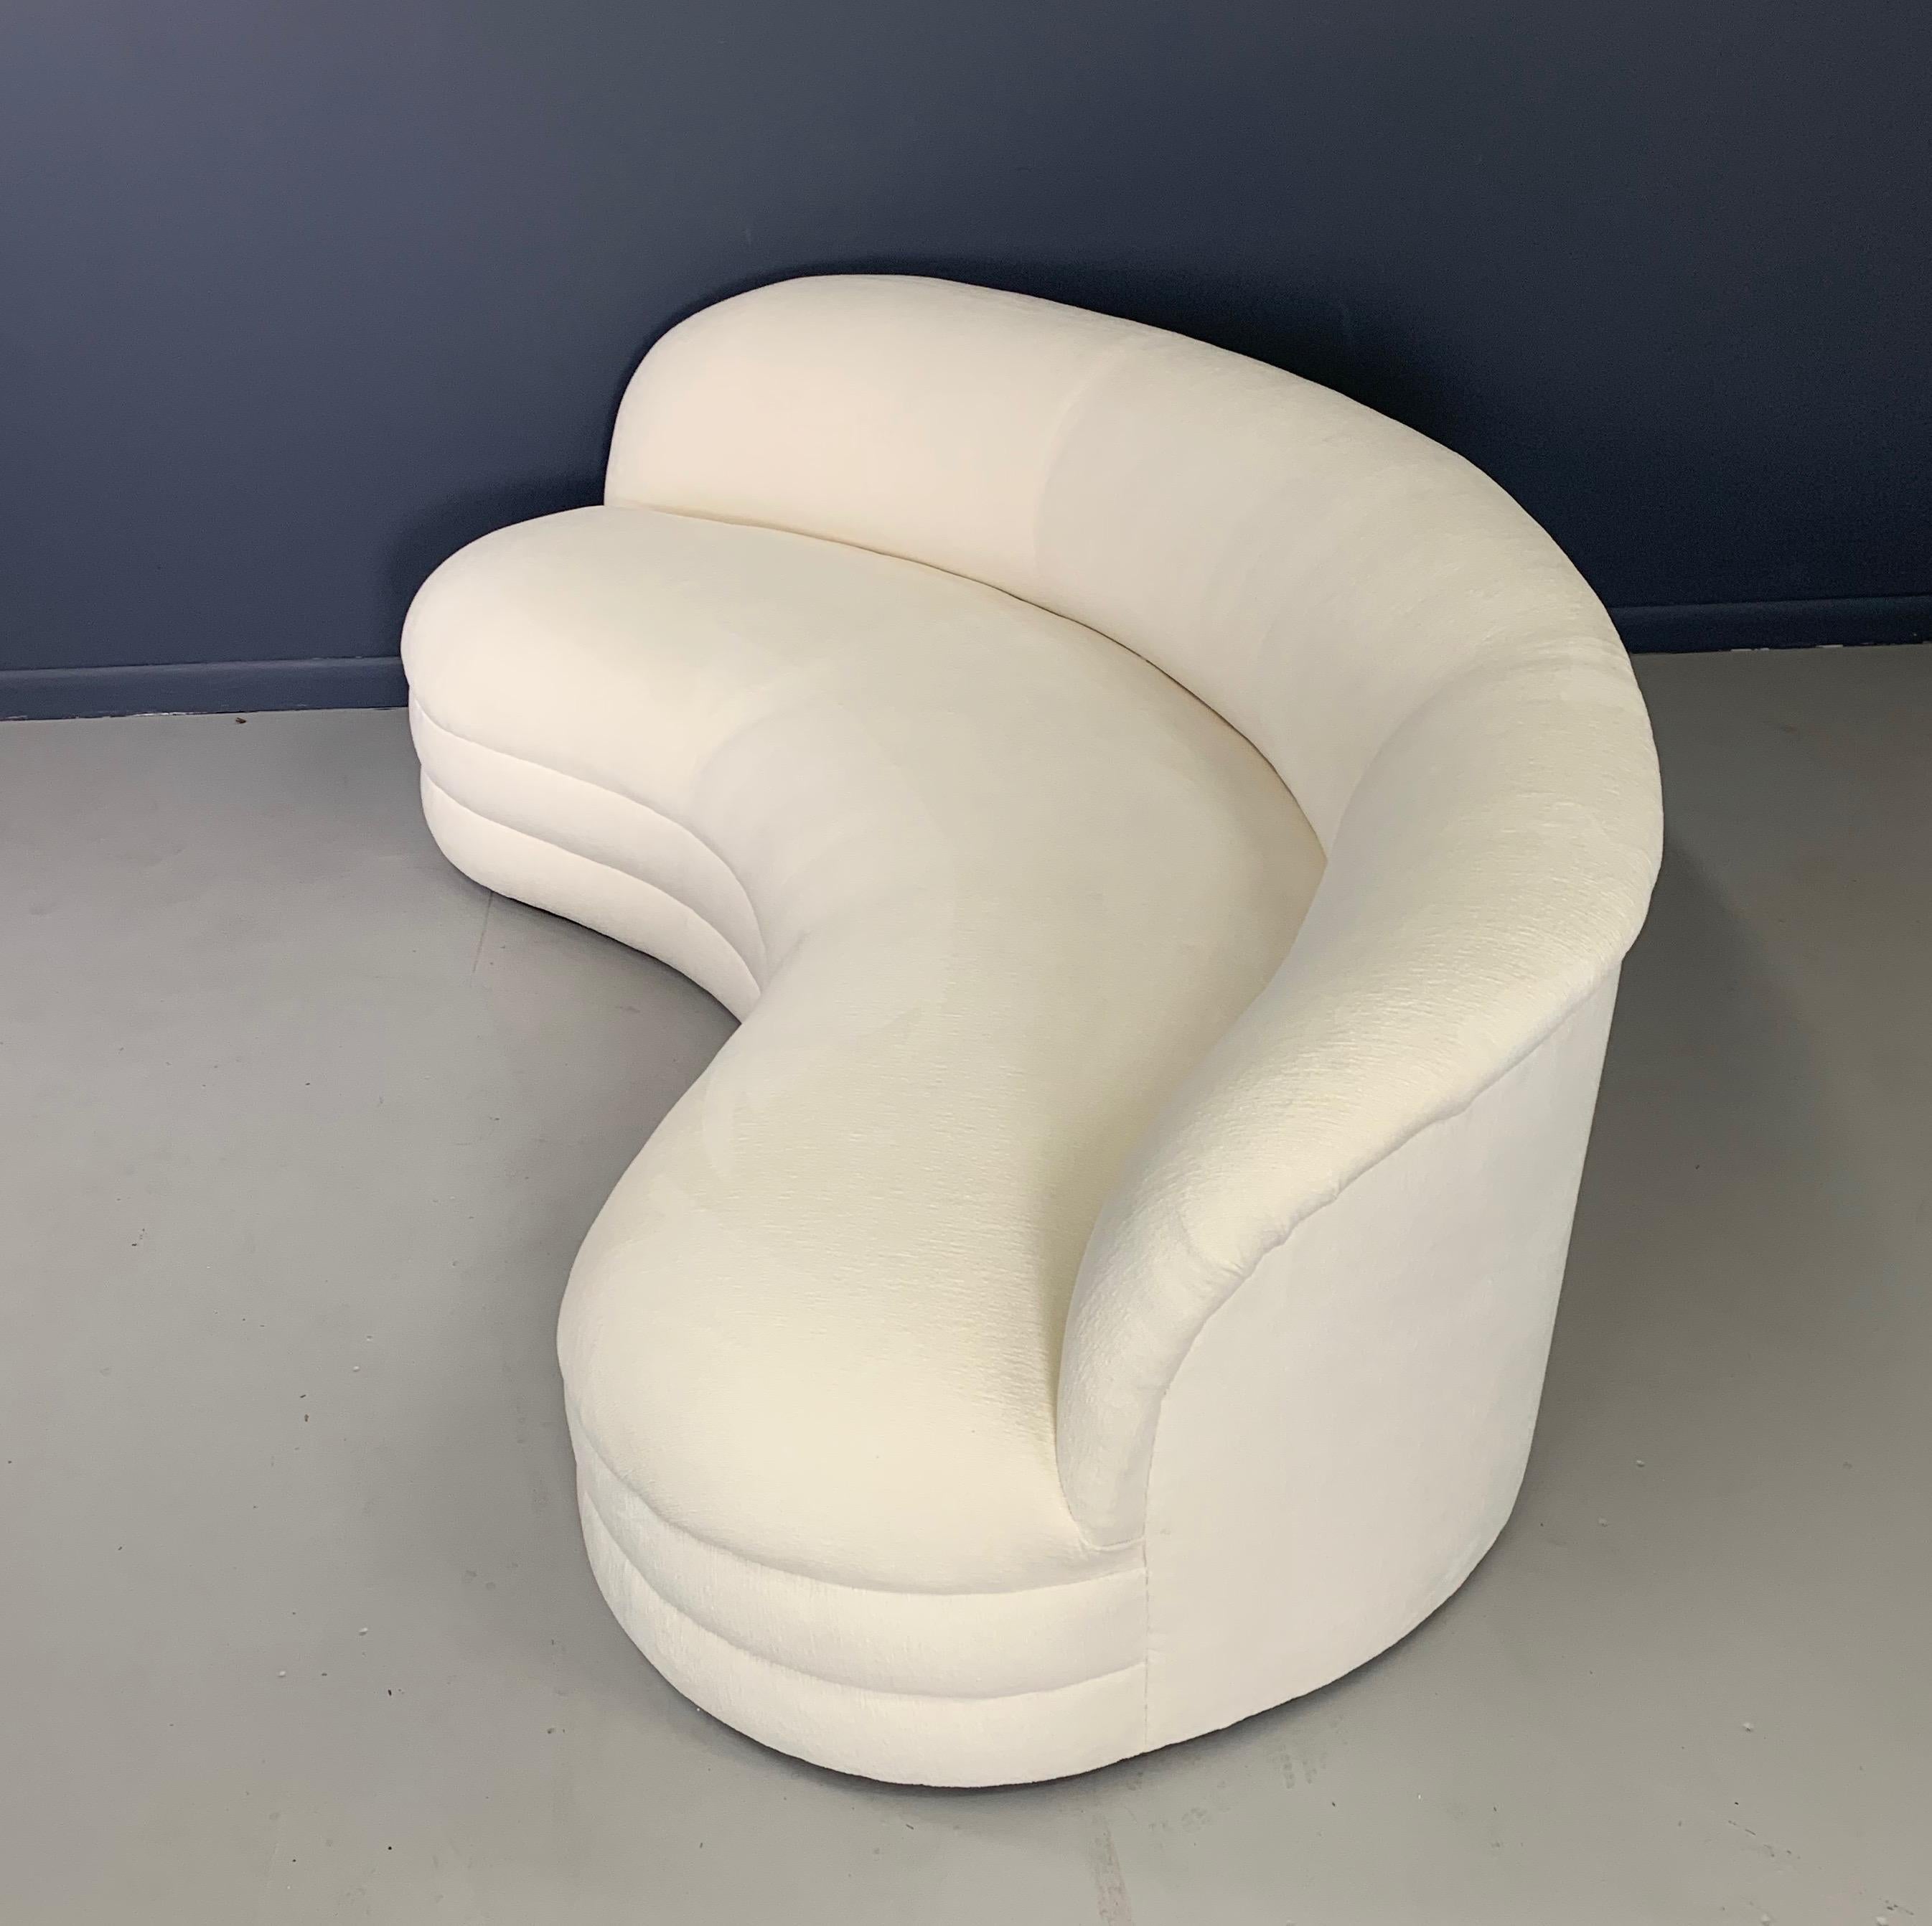 A unique kidney-shaped sofa, circa 1970s. The sofa features a nice sculptural modern design, with a curved arched back and a plinth base. The sofa has been redone from top to bottom with a beautiful textured white velvet.

Measures: 84